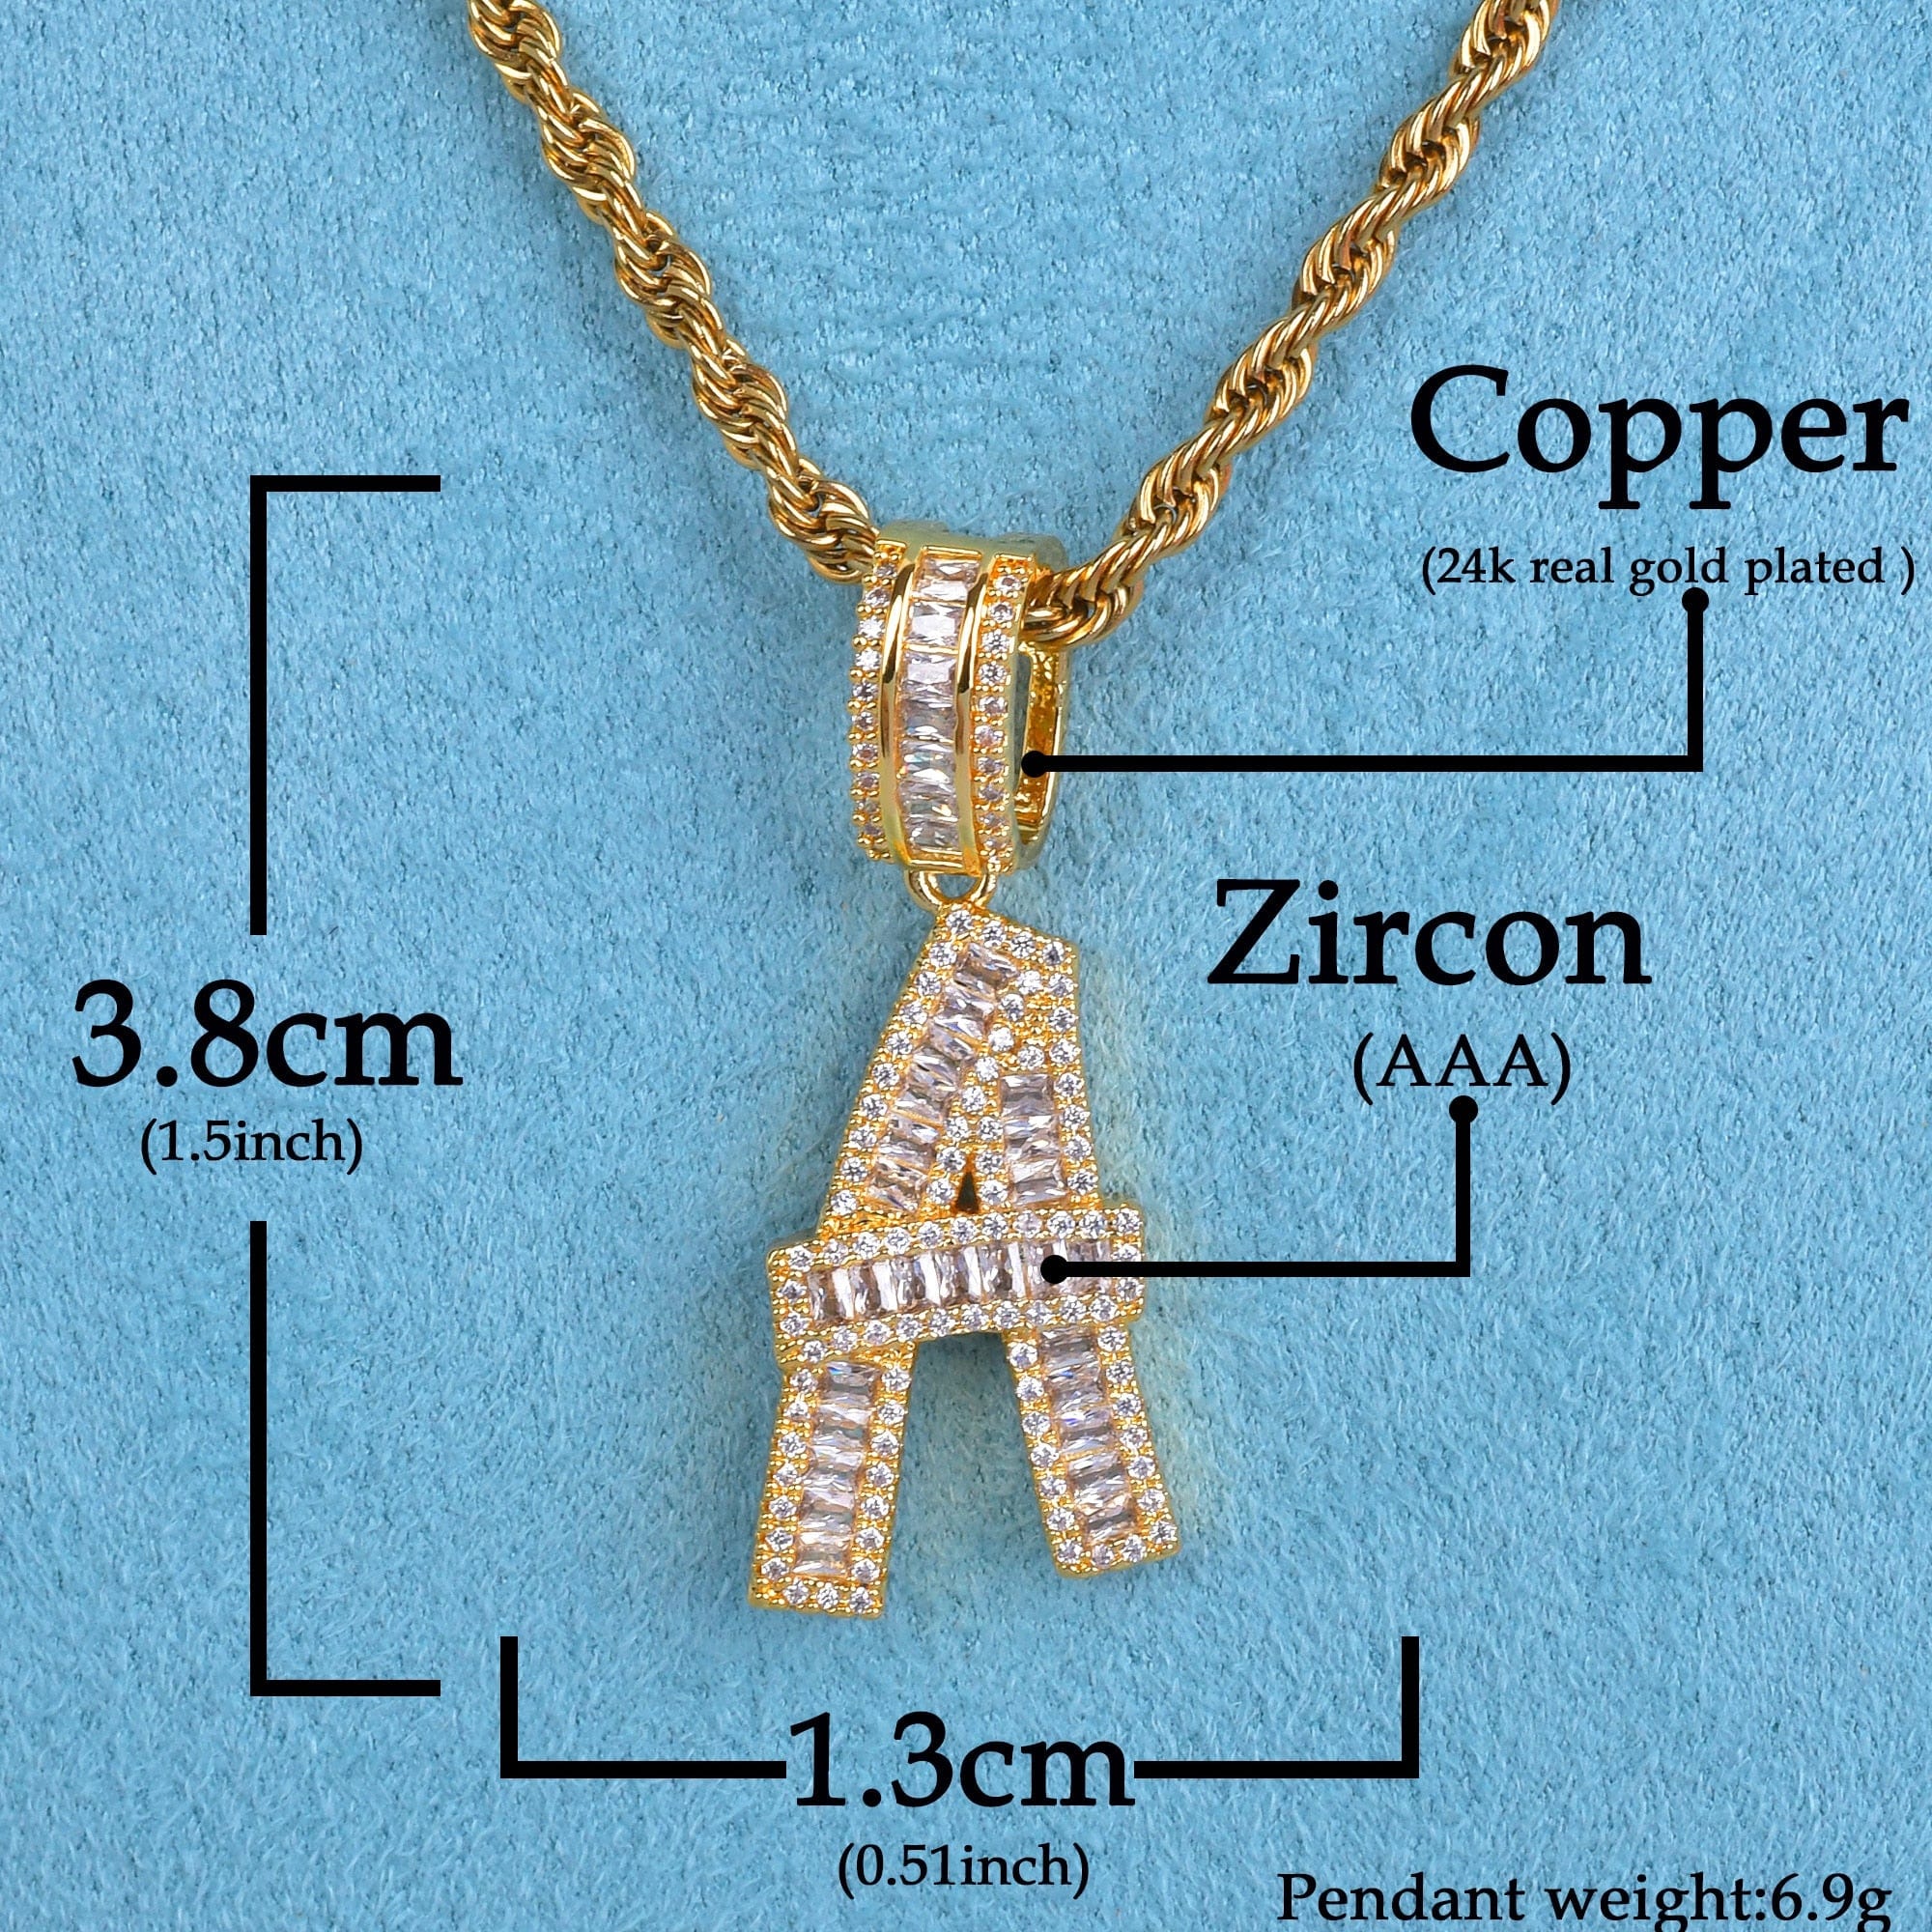 VVS Jewelry hip hop jewelry Initial Iced out Baguette Letter Pendant + FREE Chain